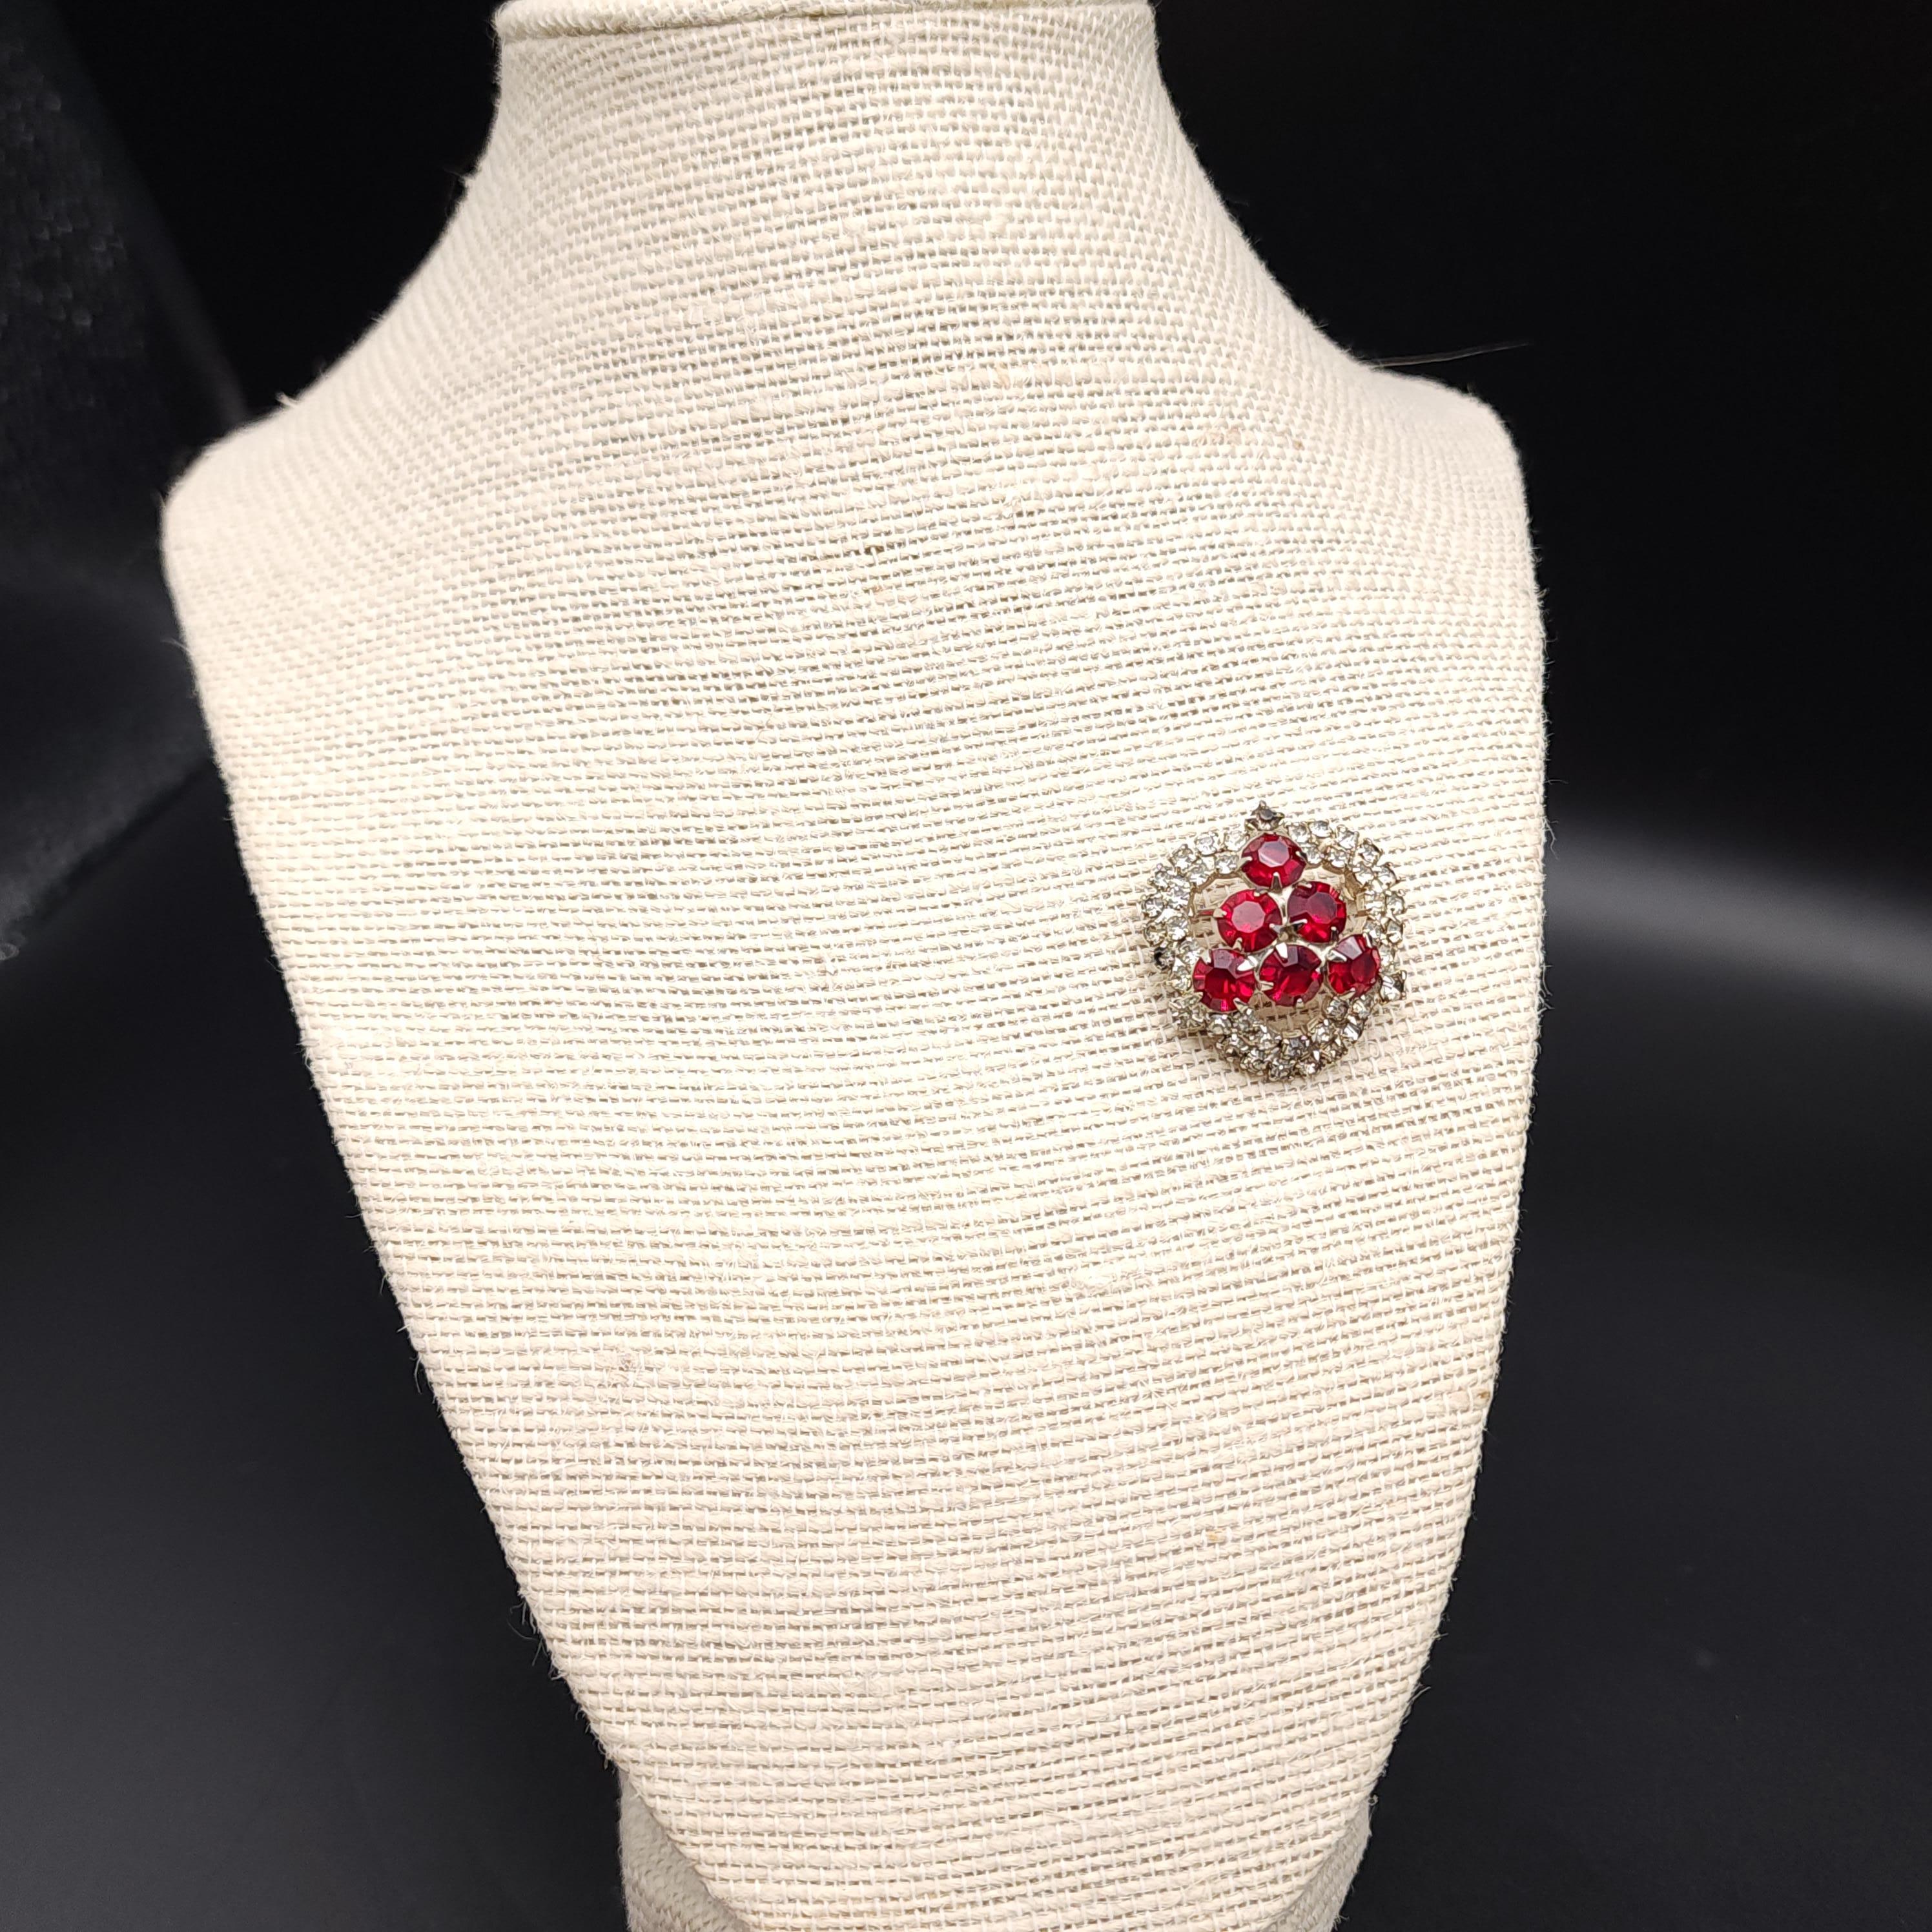 Size: 1 1/8 inches

Discover the elegance of the past with our vintage mid-1900s brooch, featuring a striking triangular pattern of ruby-colored crystals. Each crystal is meticulously prong-set to showcase its brilliance and is complemented by a